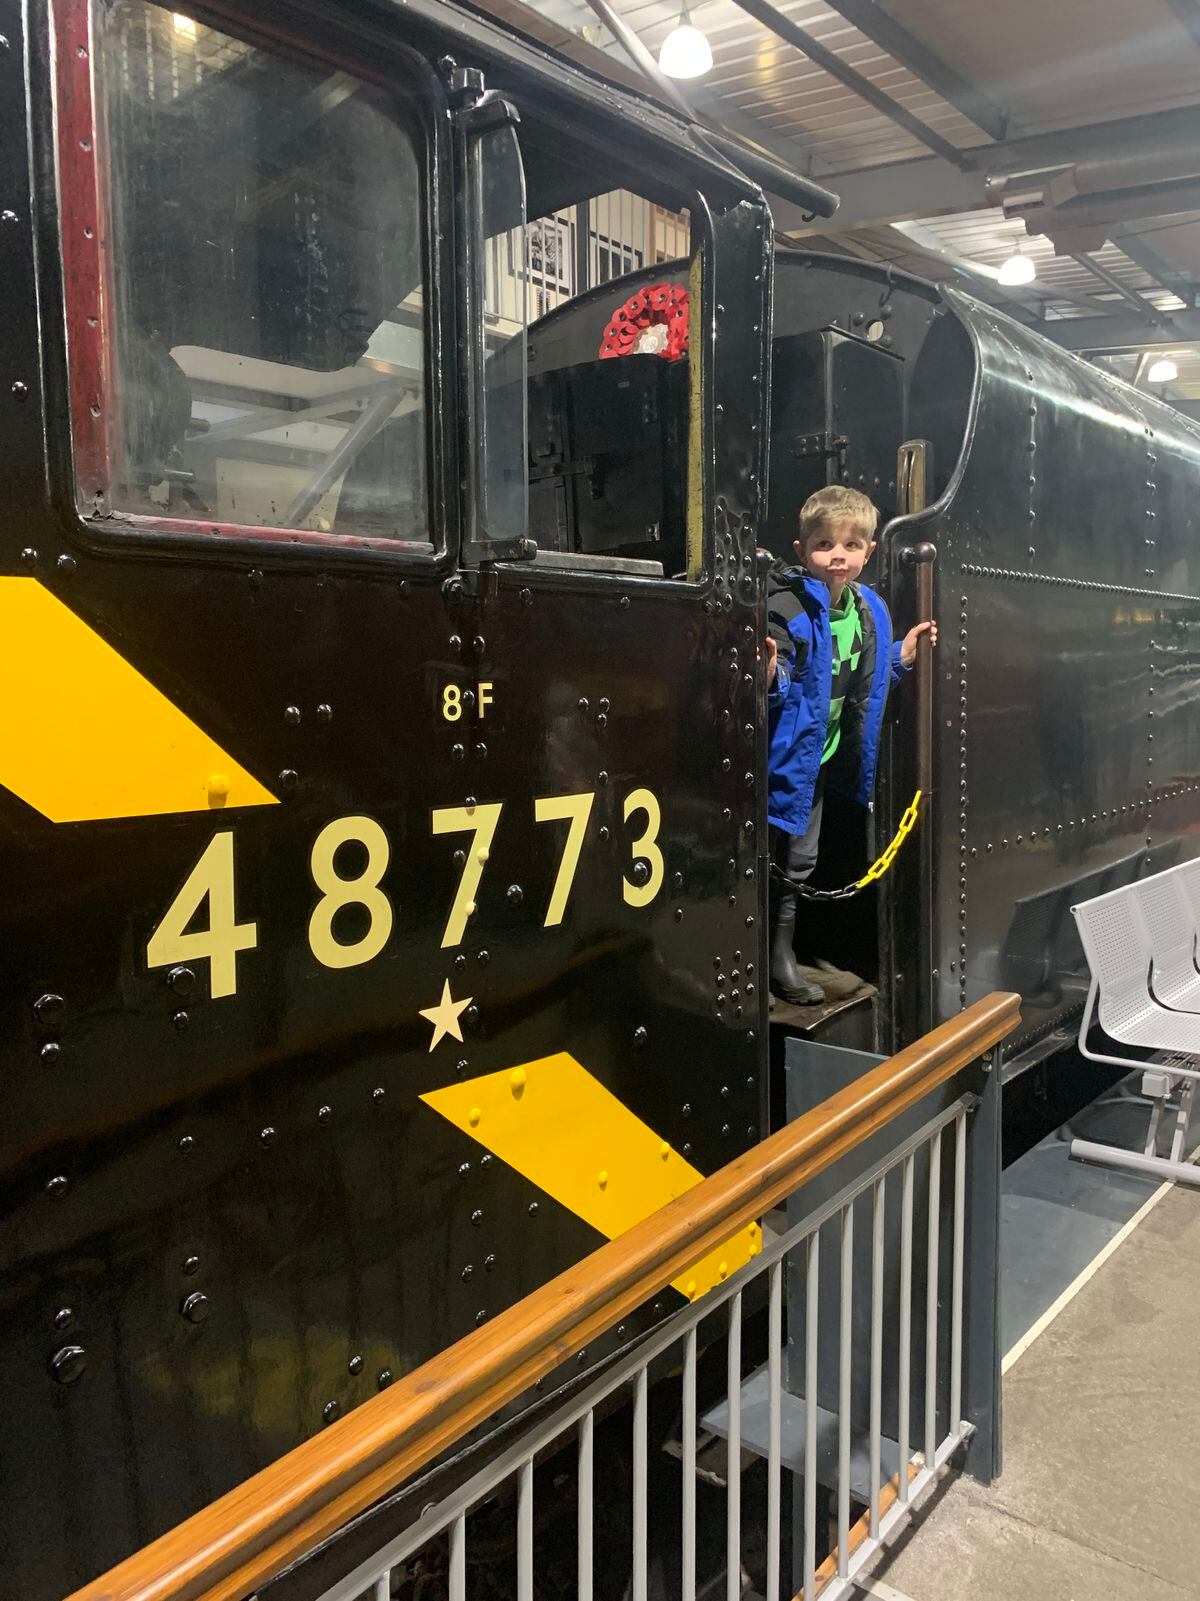 Alfie Hewish from Telford is raising money for the Severn Valley Railway 